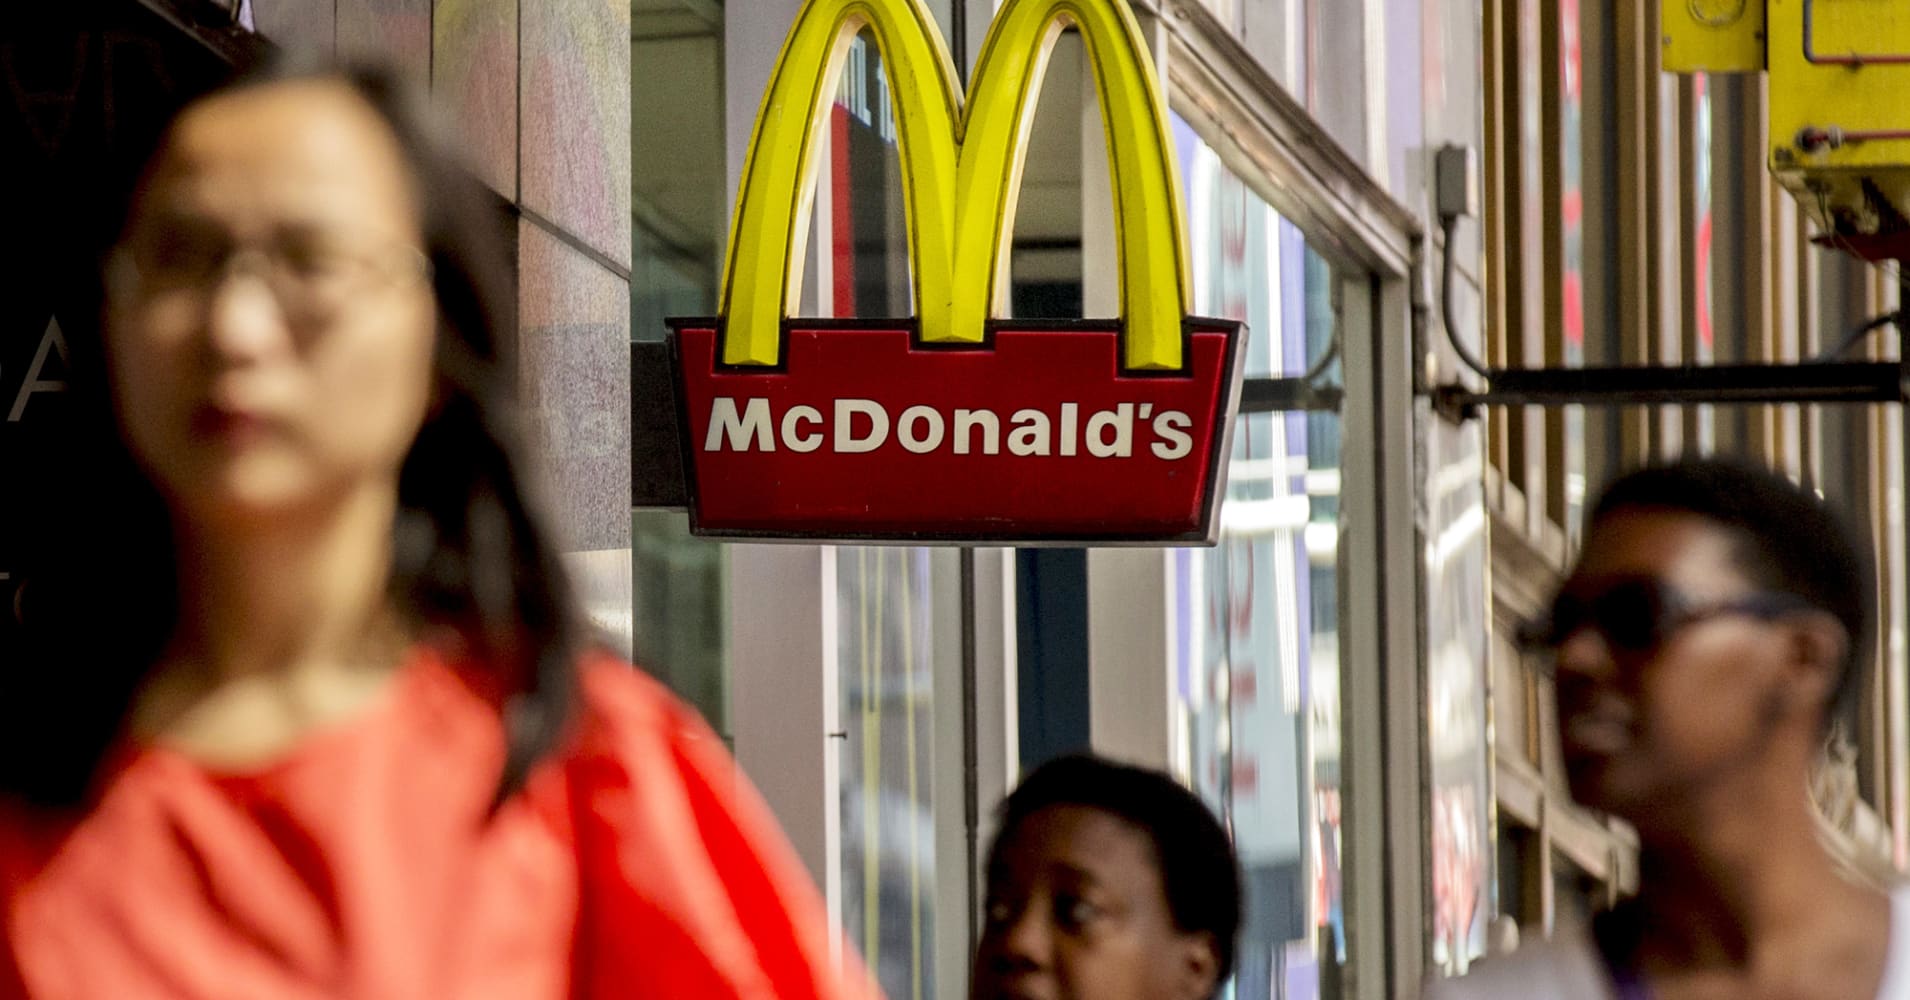 McDonald's chains shutter across US in support of 'A Day Without Immigrants' protest - CNBC